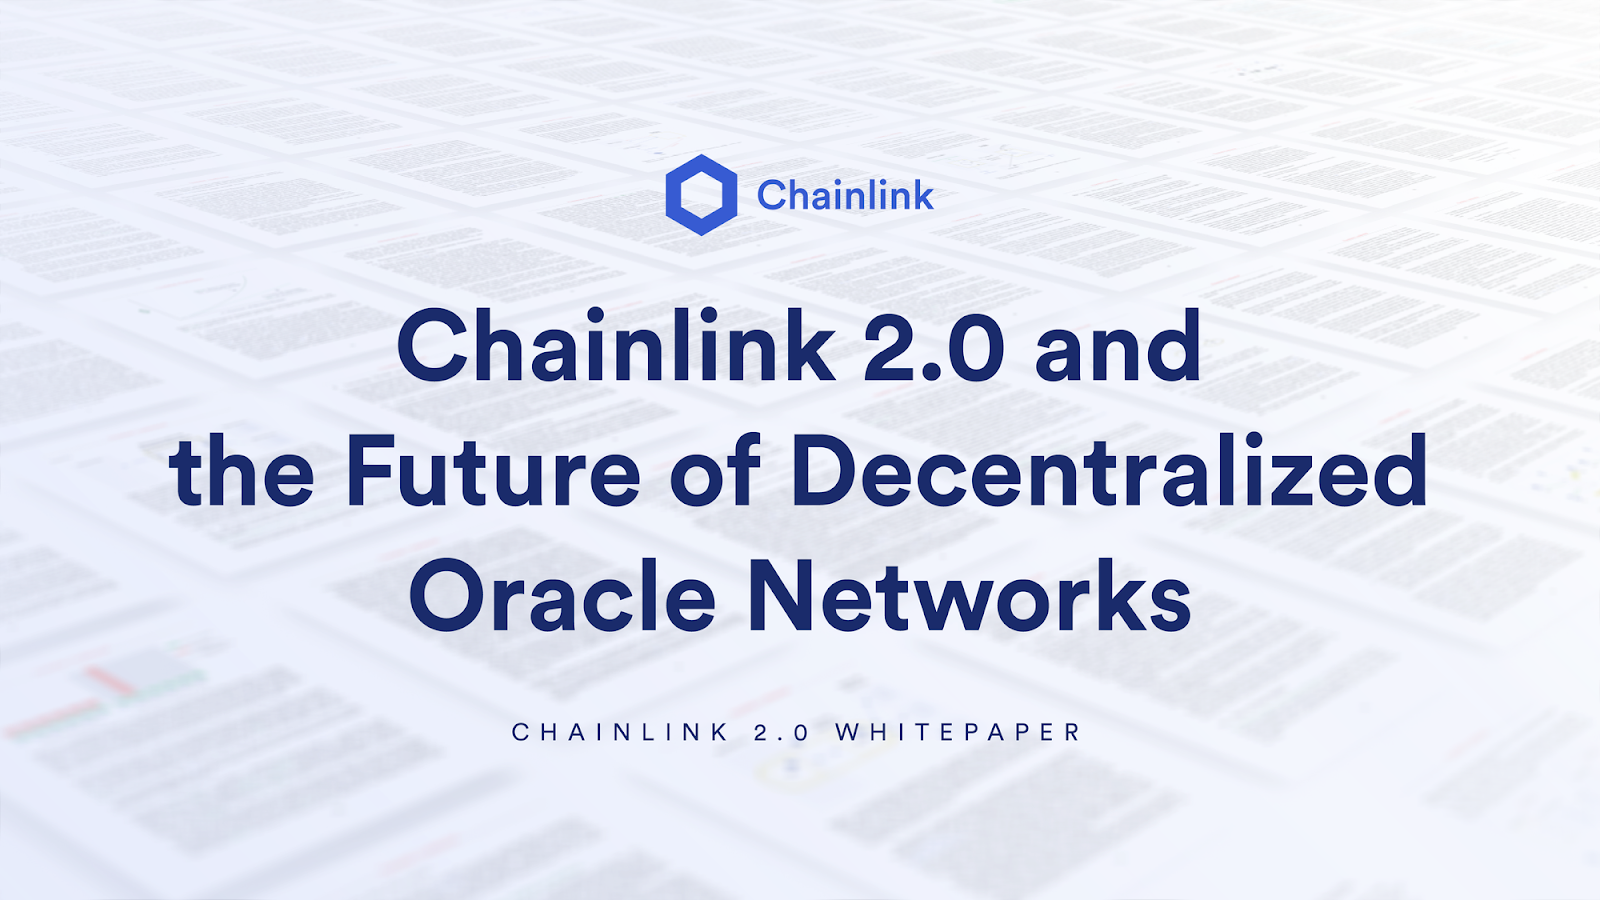 The whitepaper of Chainlink 2.0 - The Future of Decentralized Oracle Networks.